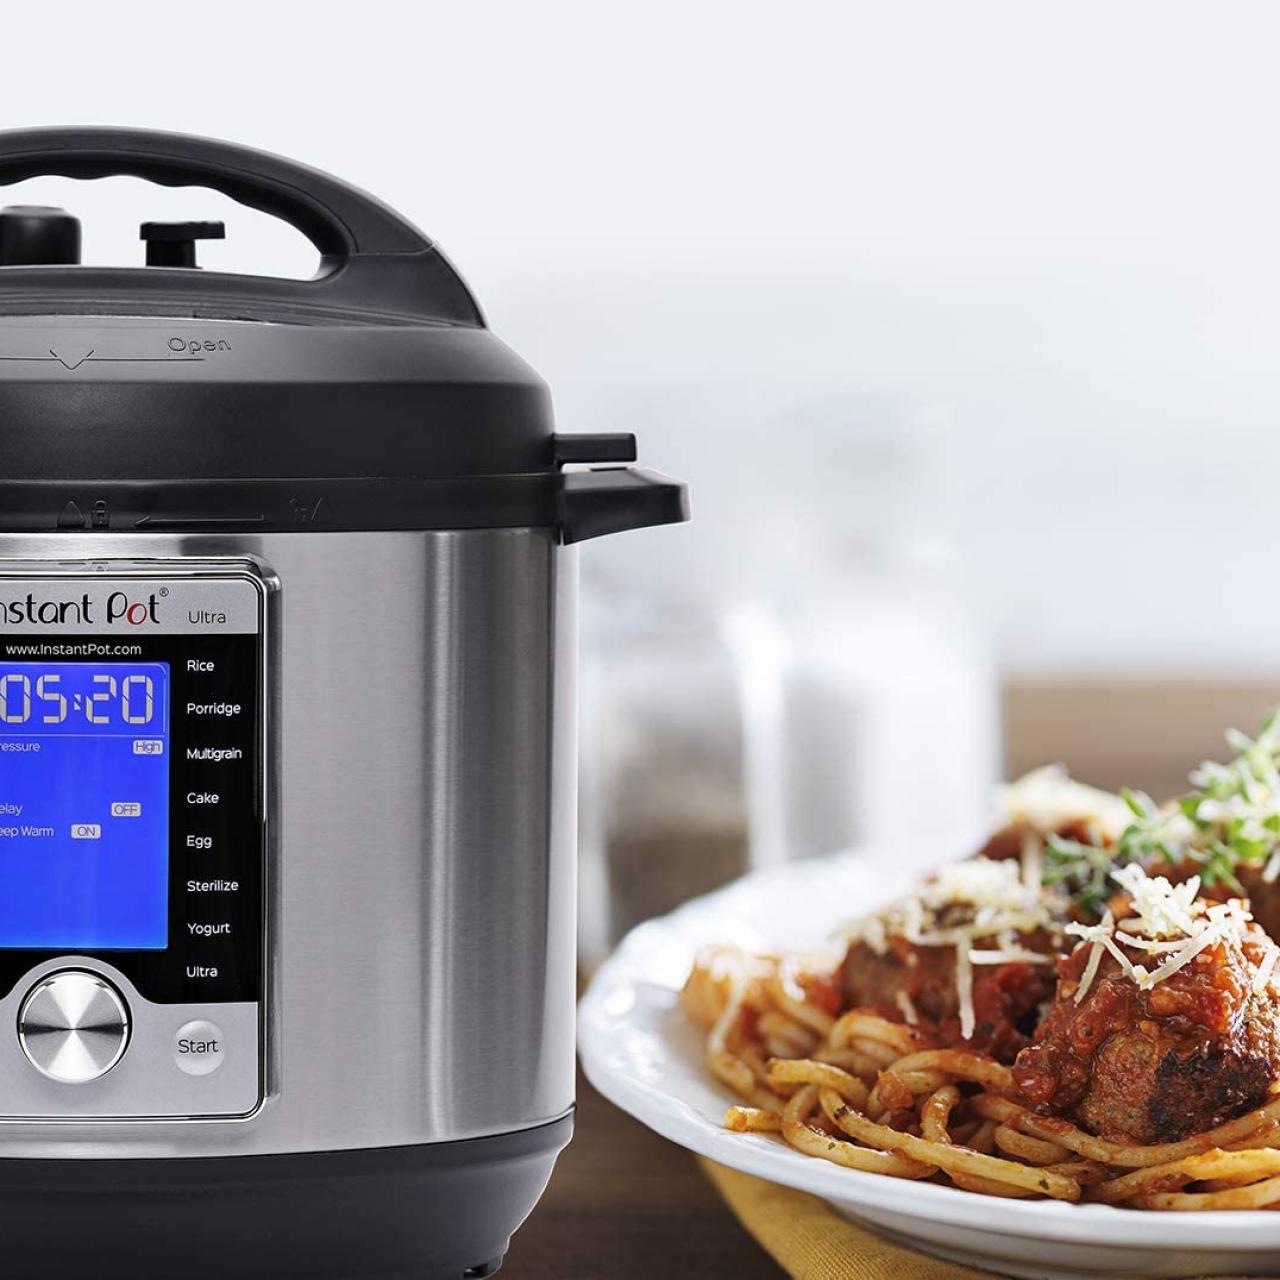 Instant Pot Ultra - What You Need To Know!